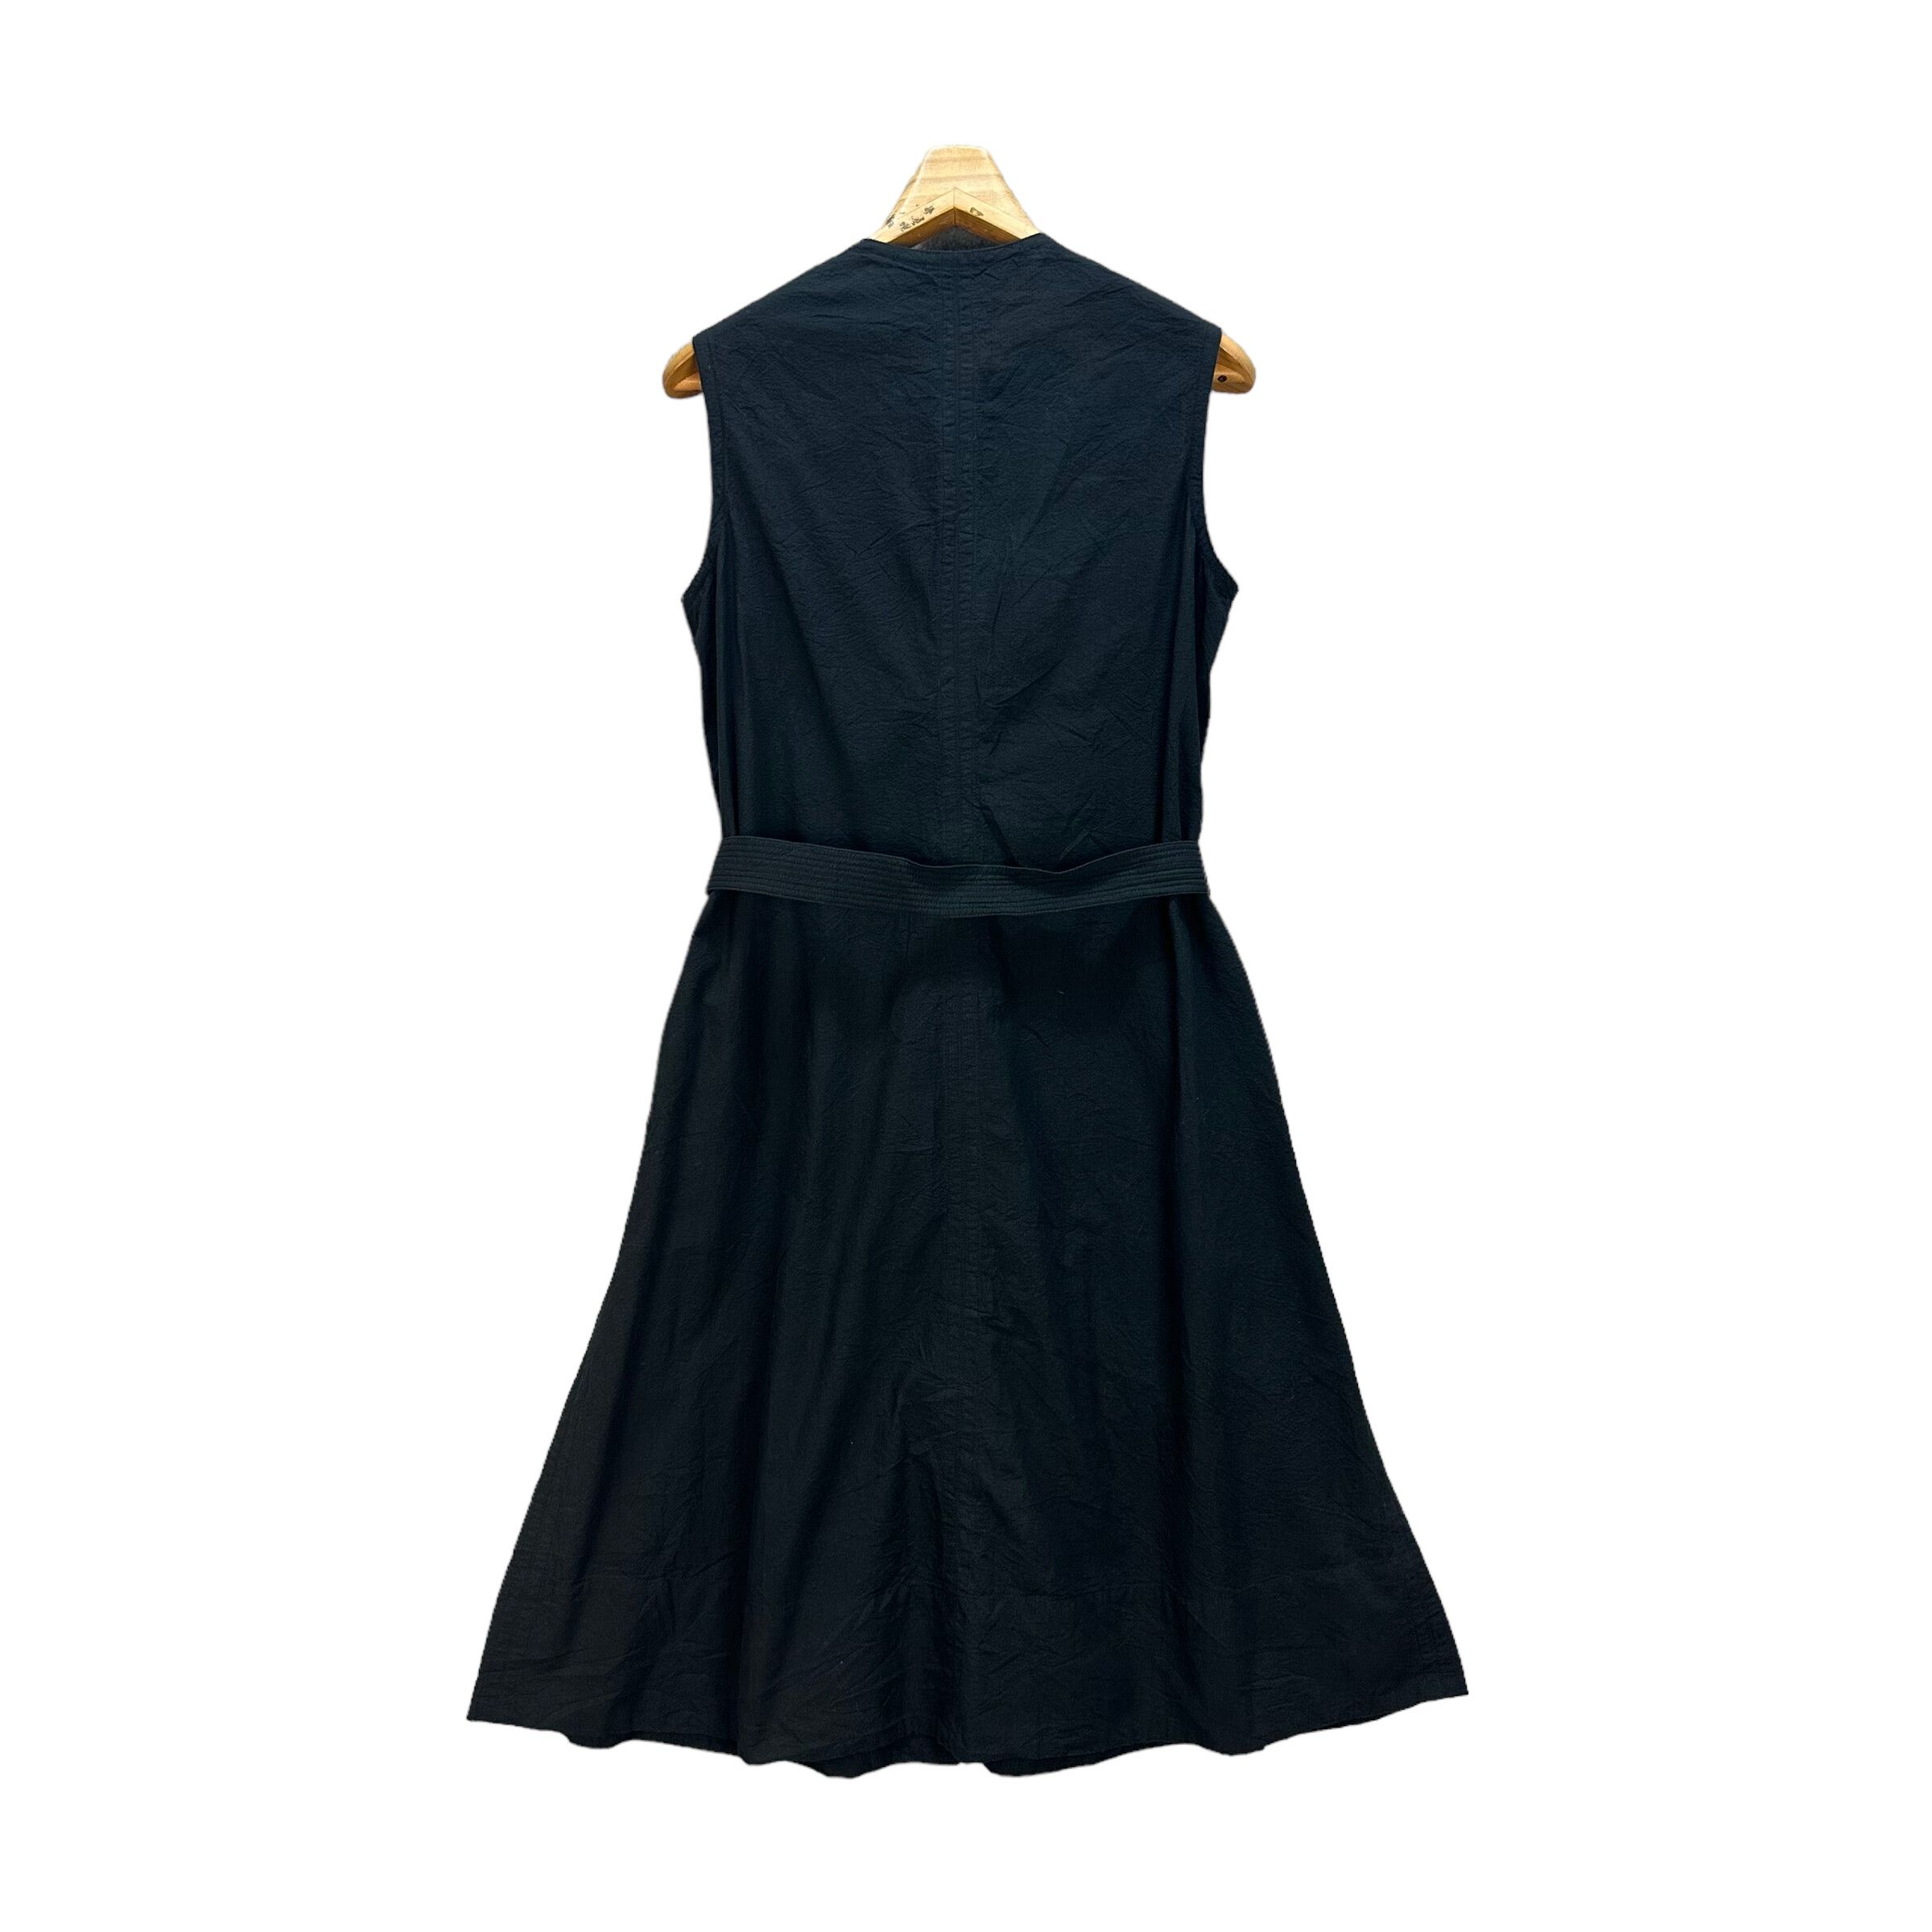 UNIQLO AND LEMAIRE DRESS #7887-188 - 8